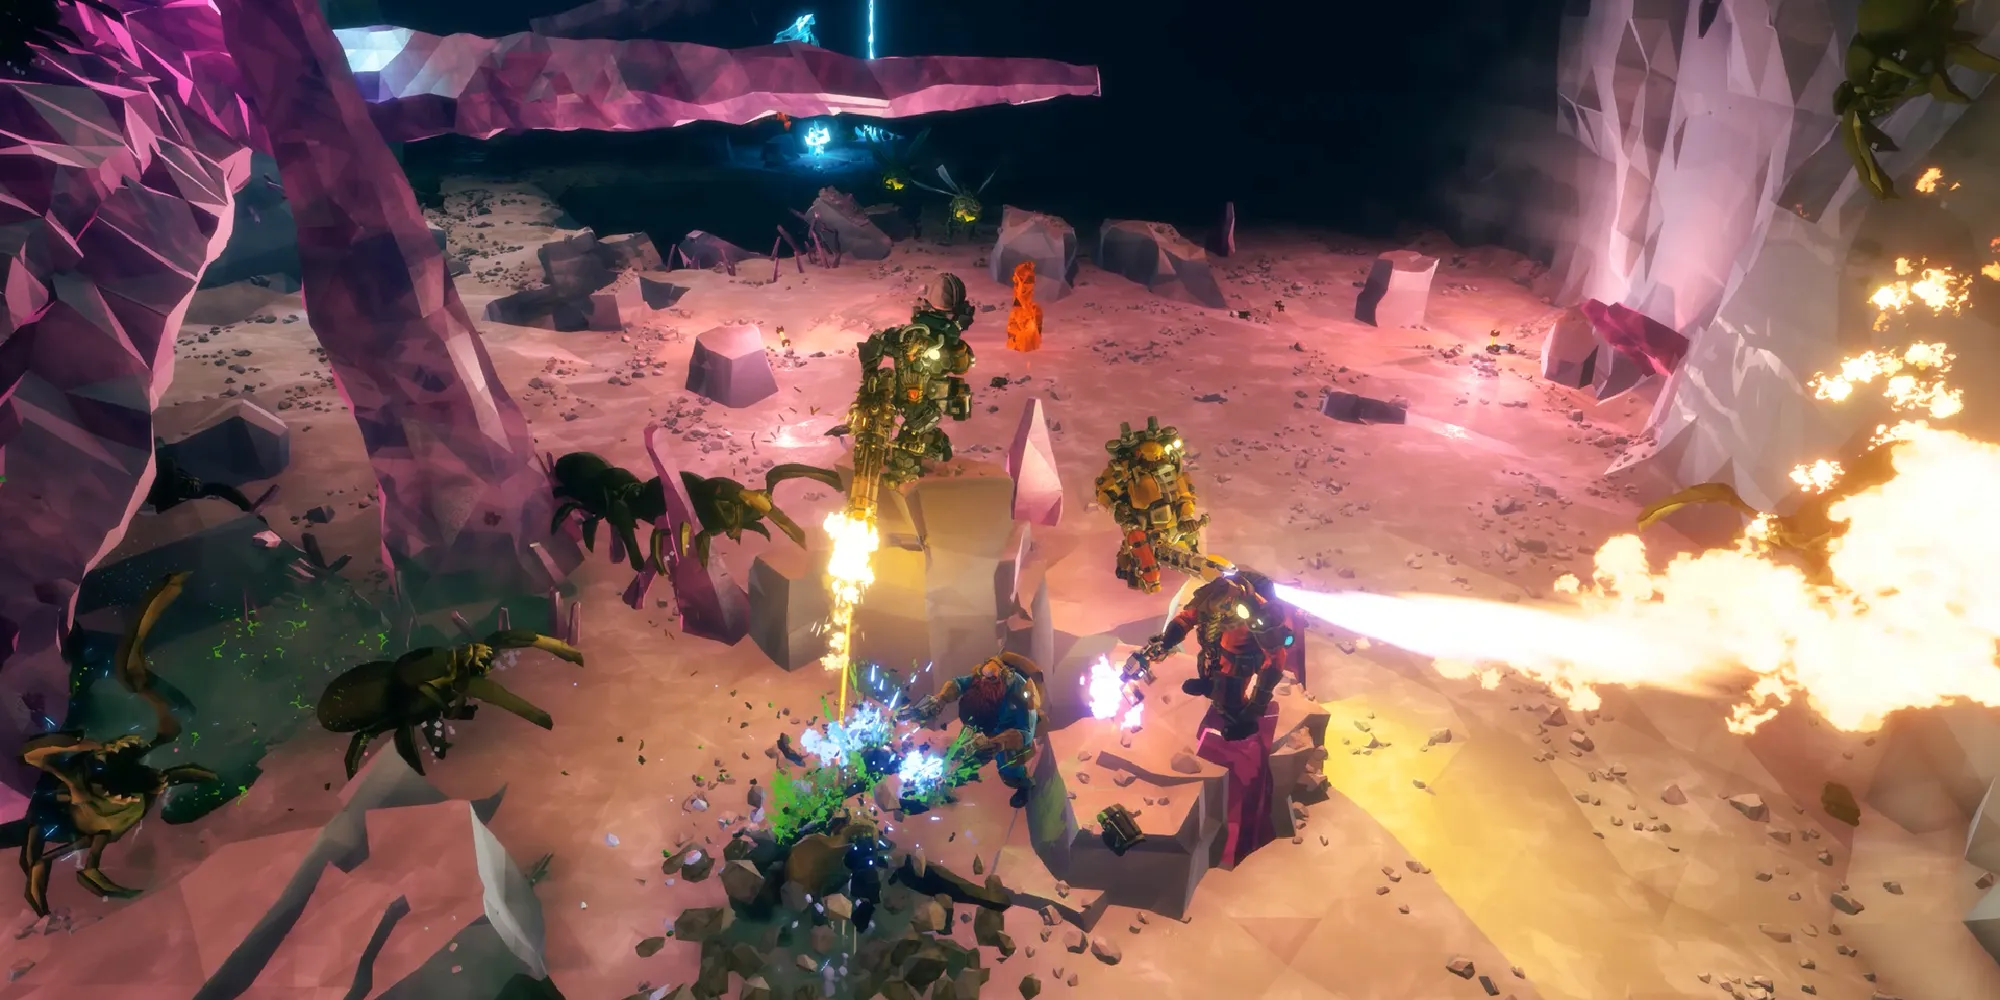 Screenshot showing the combat and monsters from Deep Rock Galactic